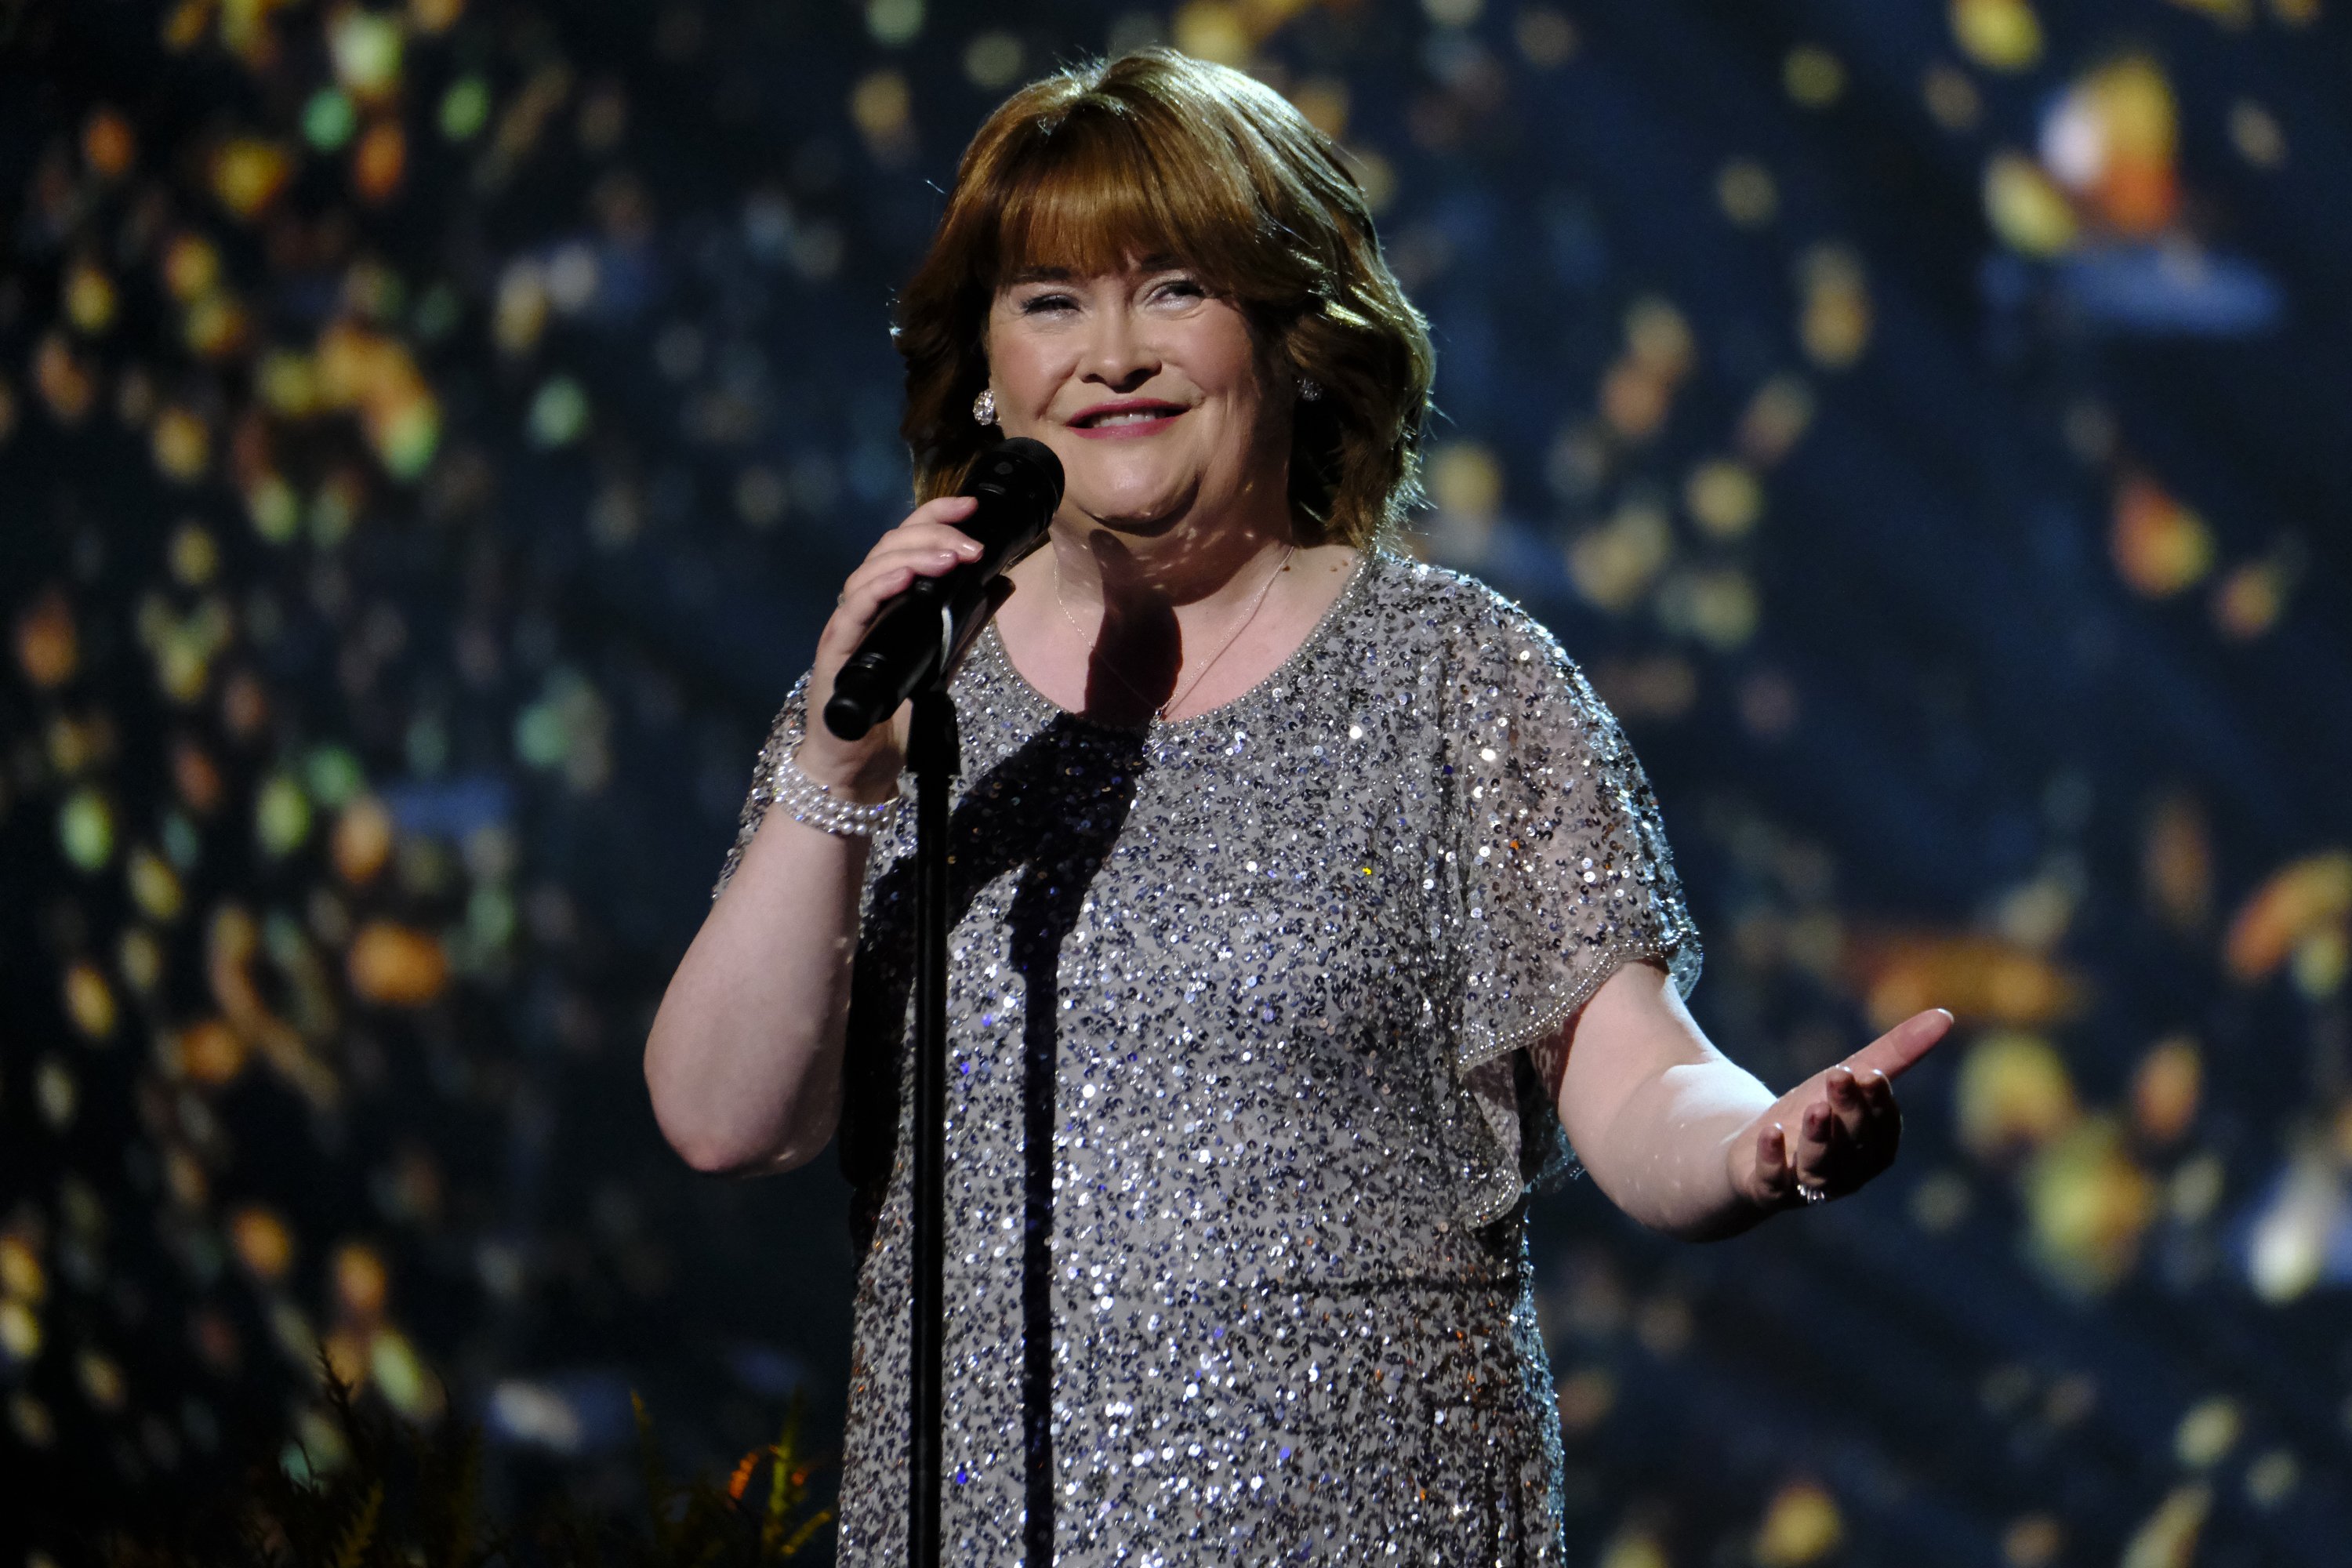 Susan Boyle at AMERICA'S GOT TALENT -- "Live Results 2" Episode 1415. | Source: Getty Images